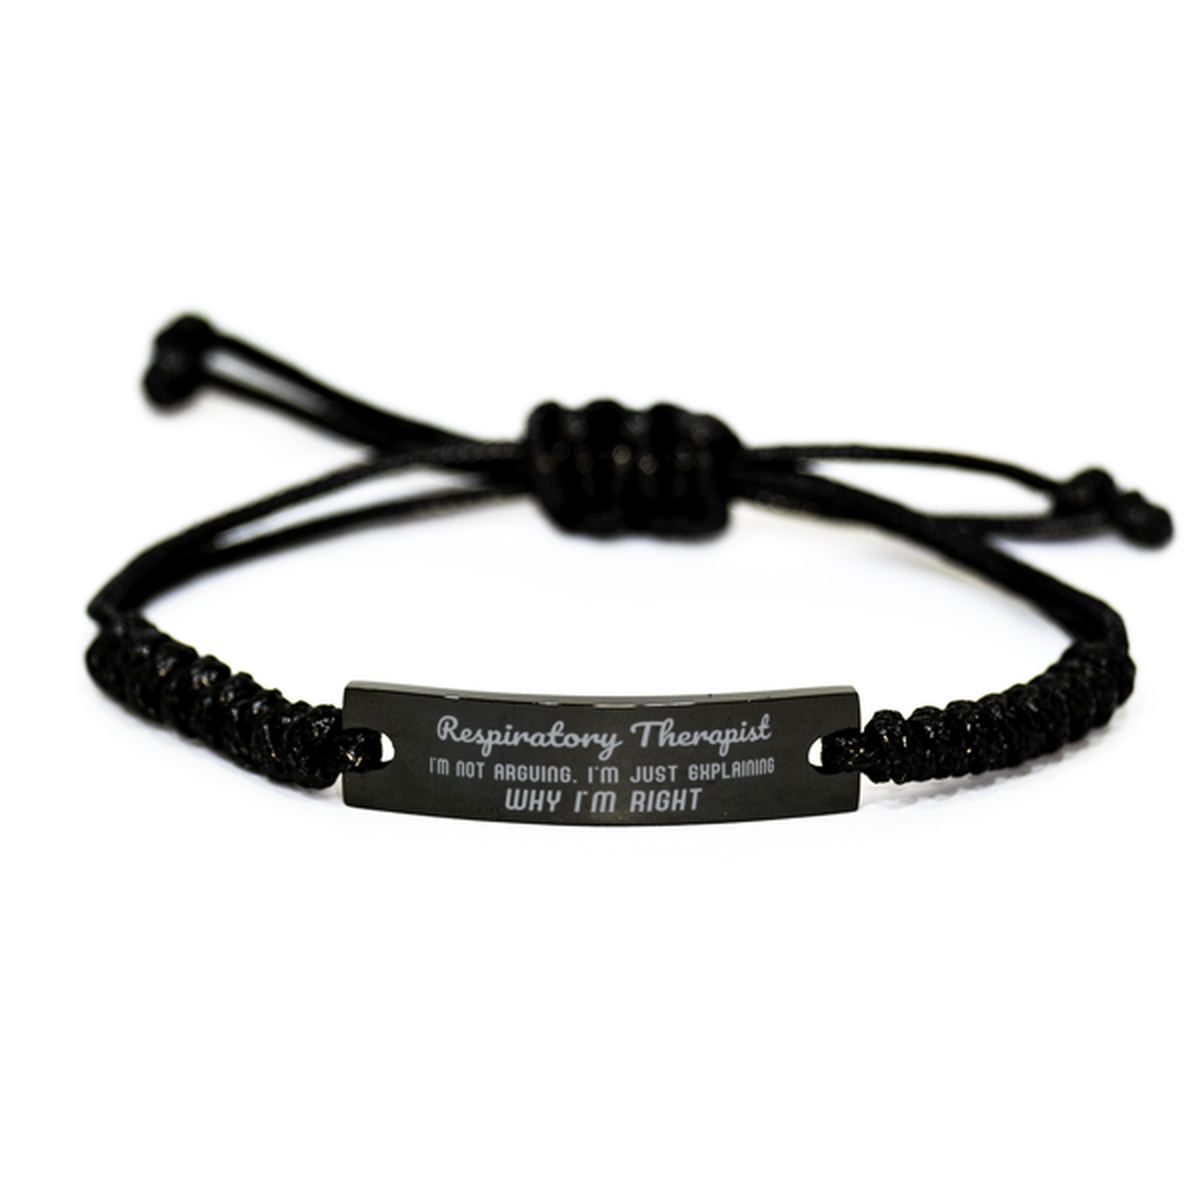 Respiratory Therapist I'm not Arguing. I'm Just Explaining Why I'm RIGHT Black Rope Bracelet, Funny Saying Quote Respiratory Therapist Gifts For Respiratory Therapist Graduation Birthday Christmas Gifts for Men Women Coworker